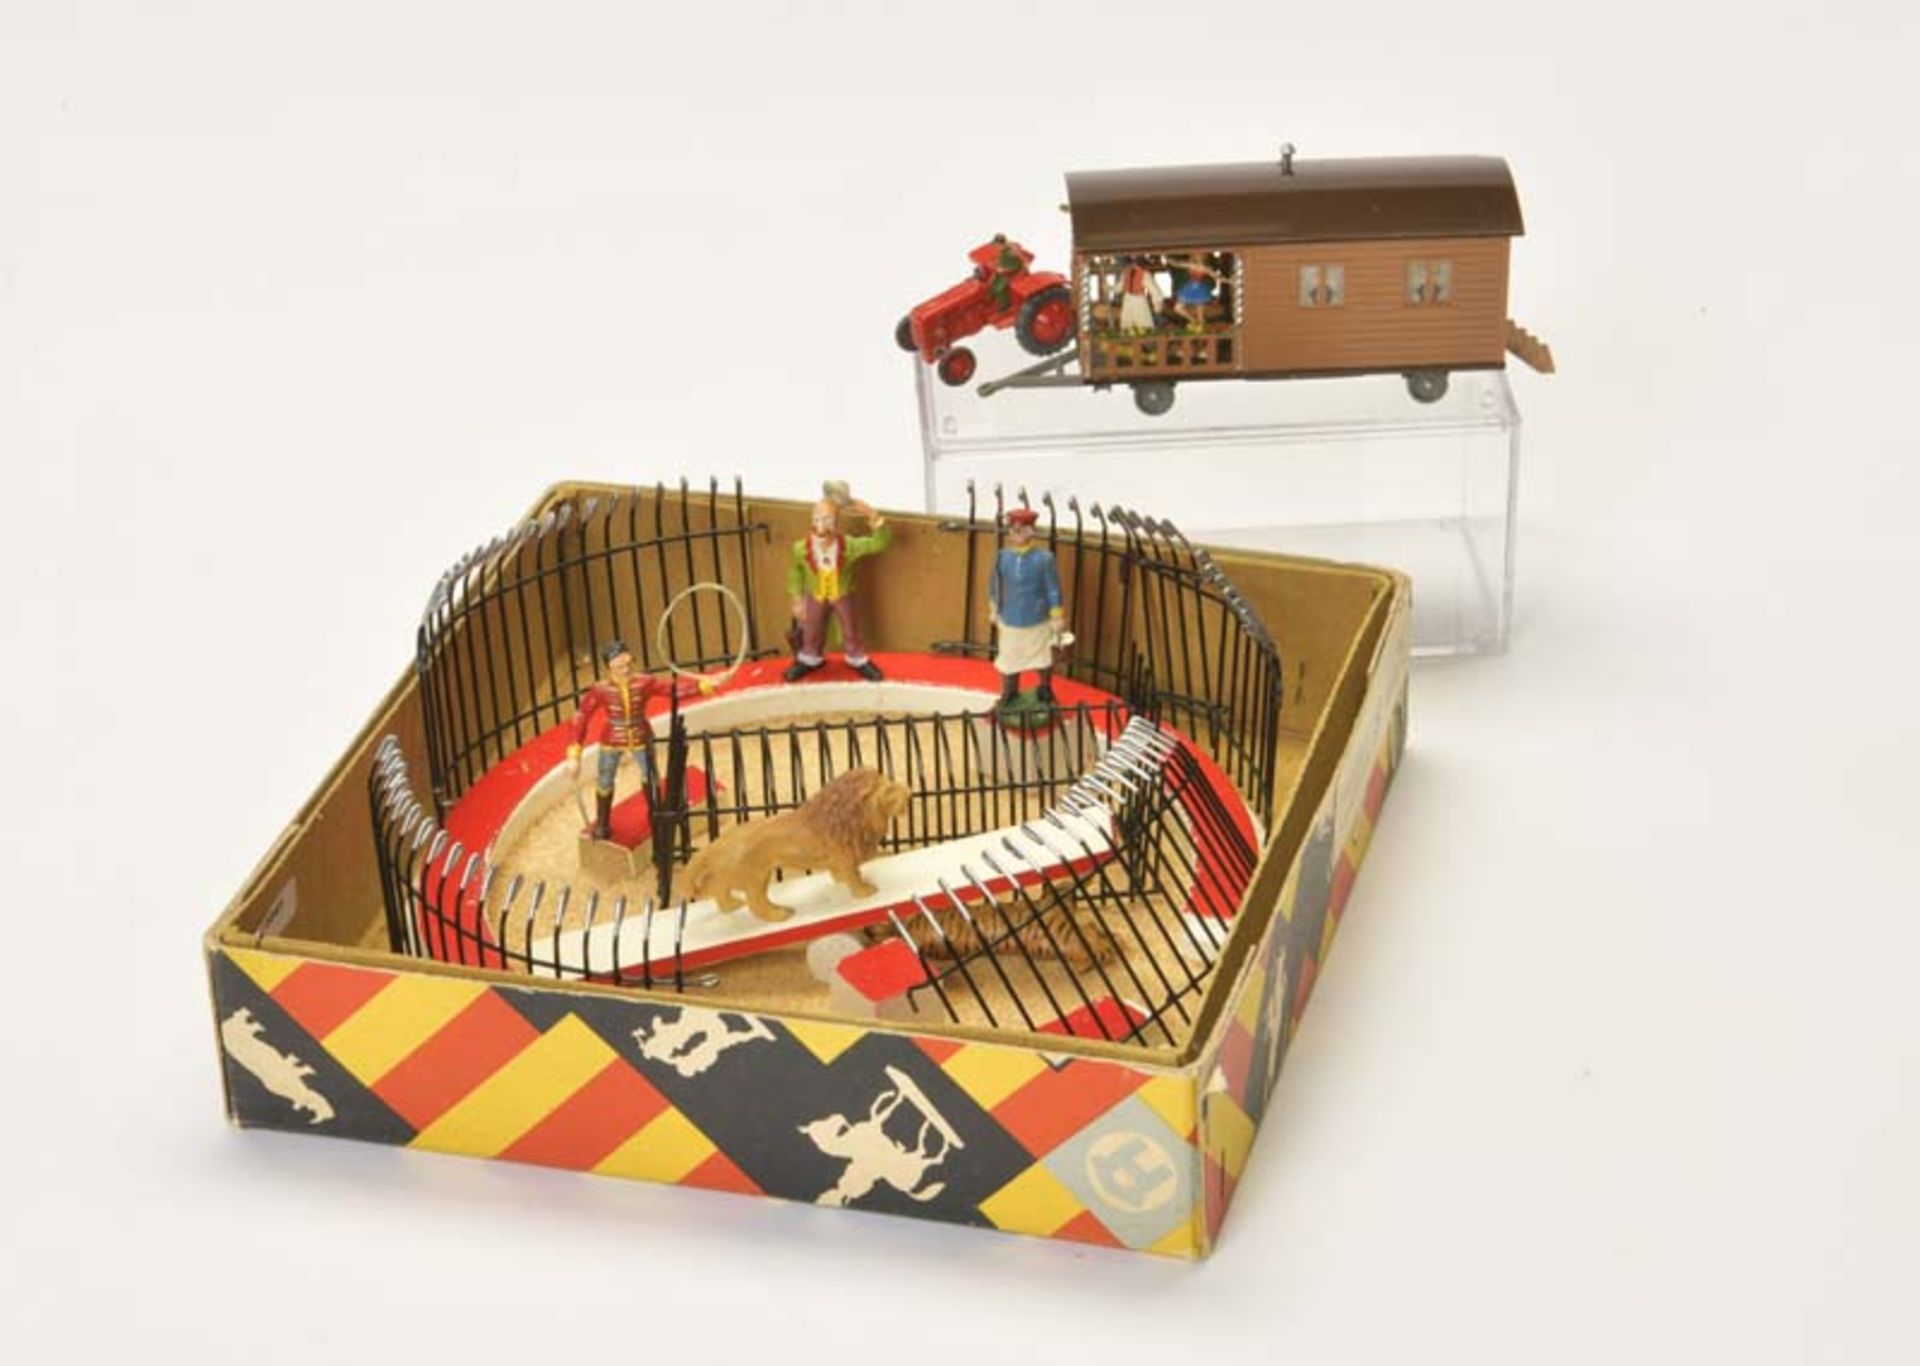 Hausser, Elastolin, Circus Ring with Animals, Figures, Cage a.o. + Siku Tractor with Circus Caravan,